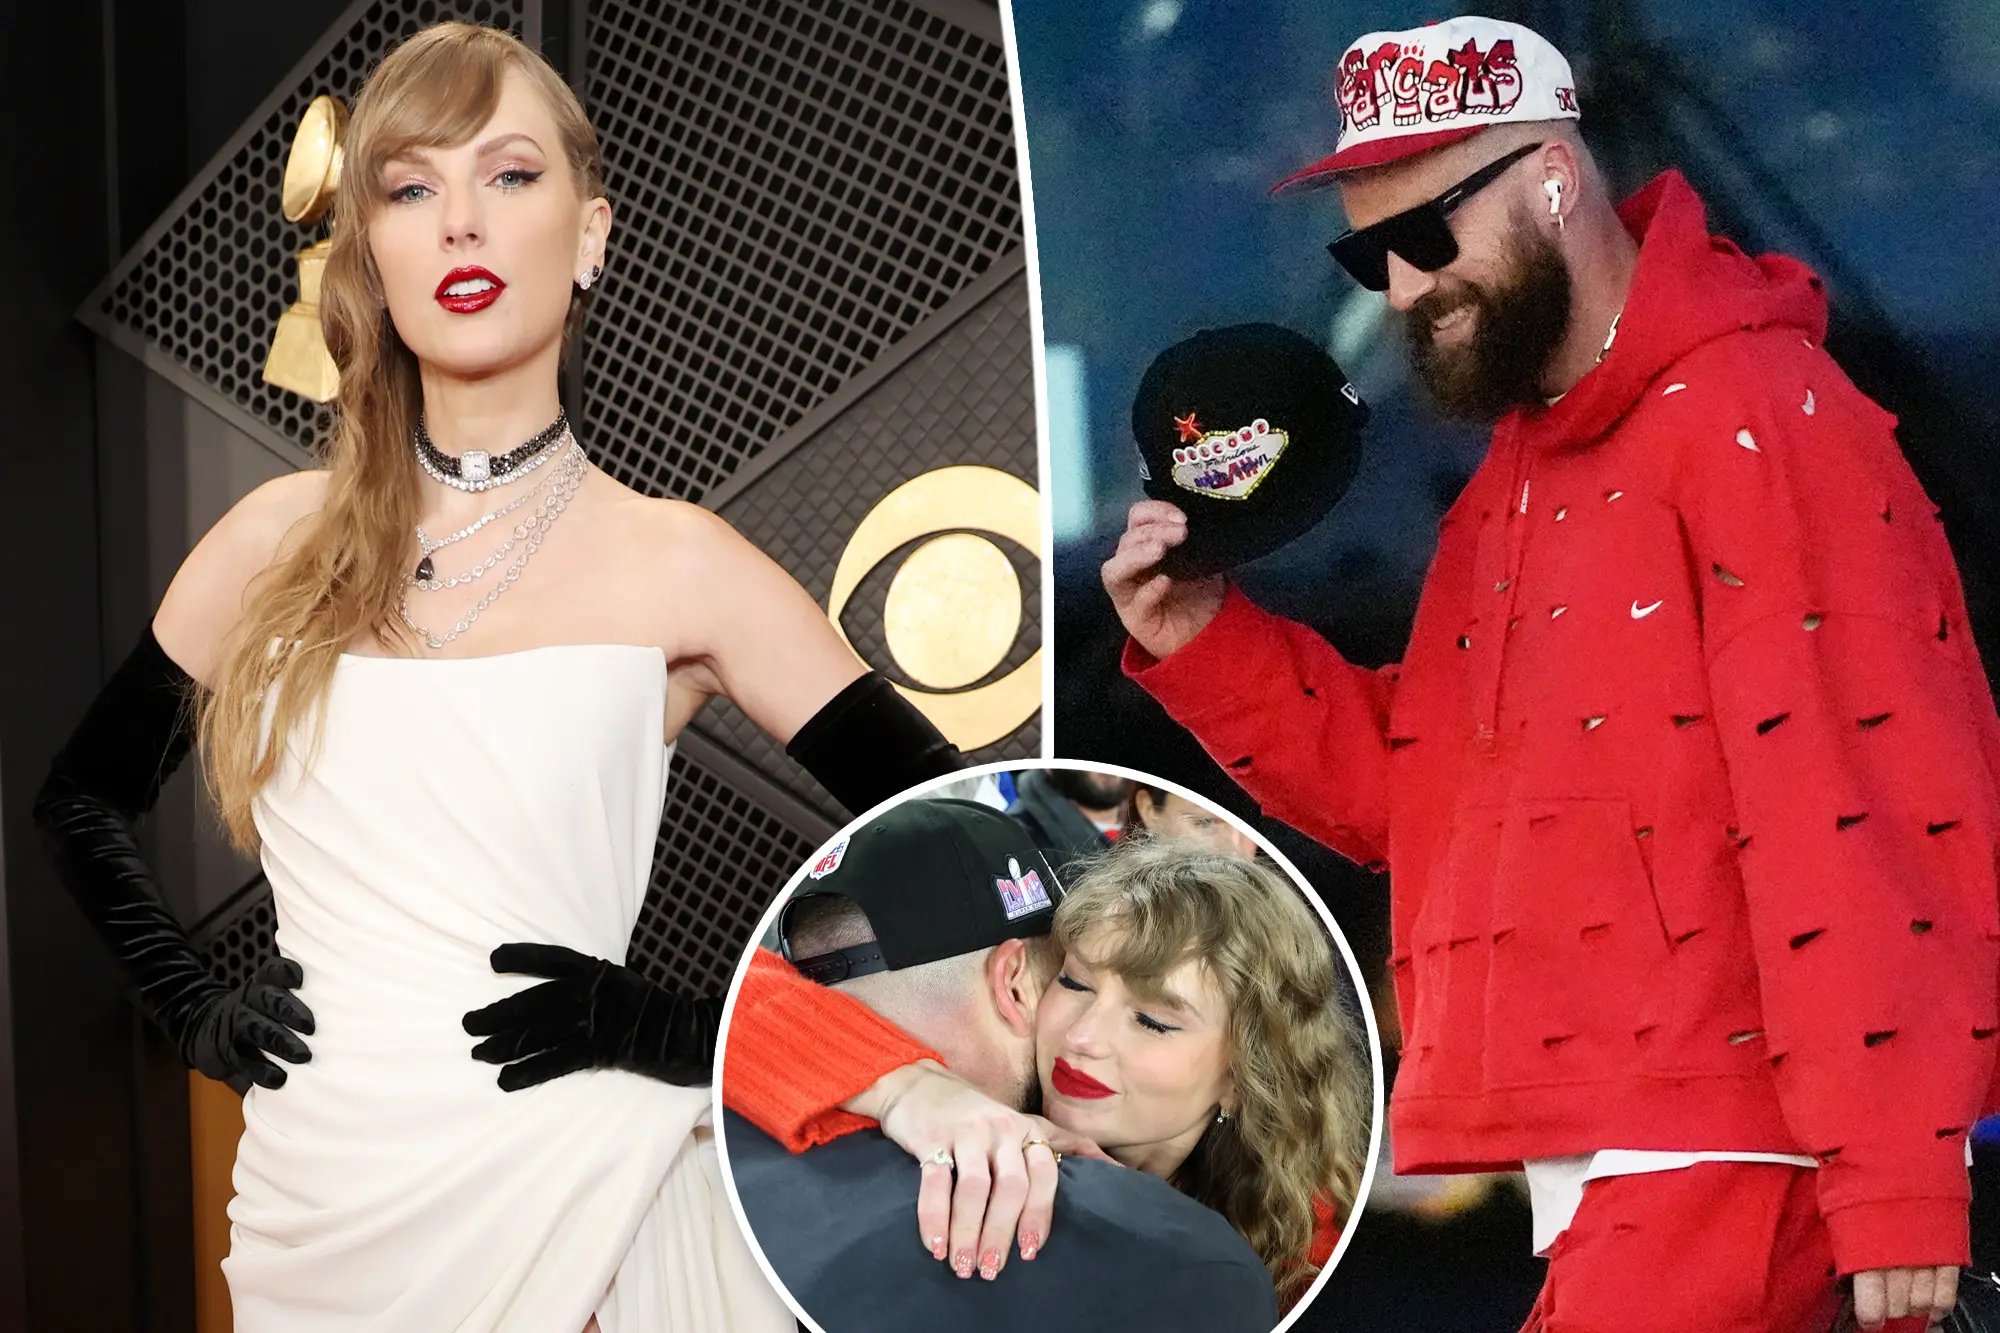 Taylor Swift gifted her lover Travis Kelce a ‘ Limited-Edition’ Mustang worth $45m to celebrate AFC champion